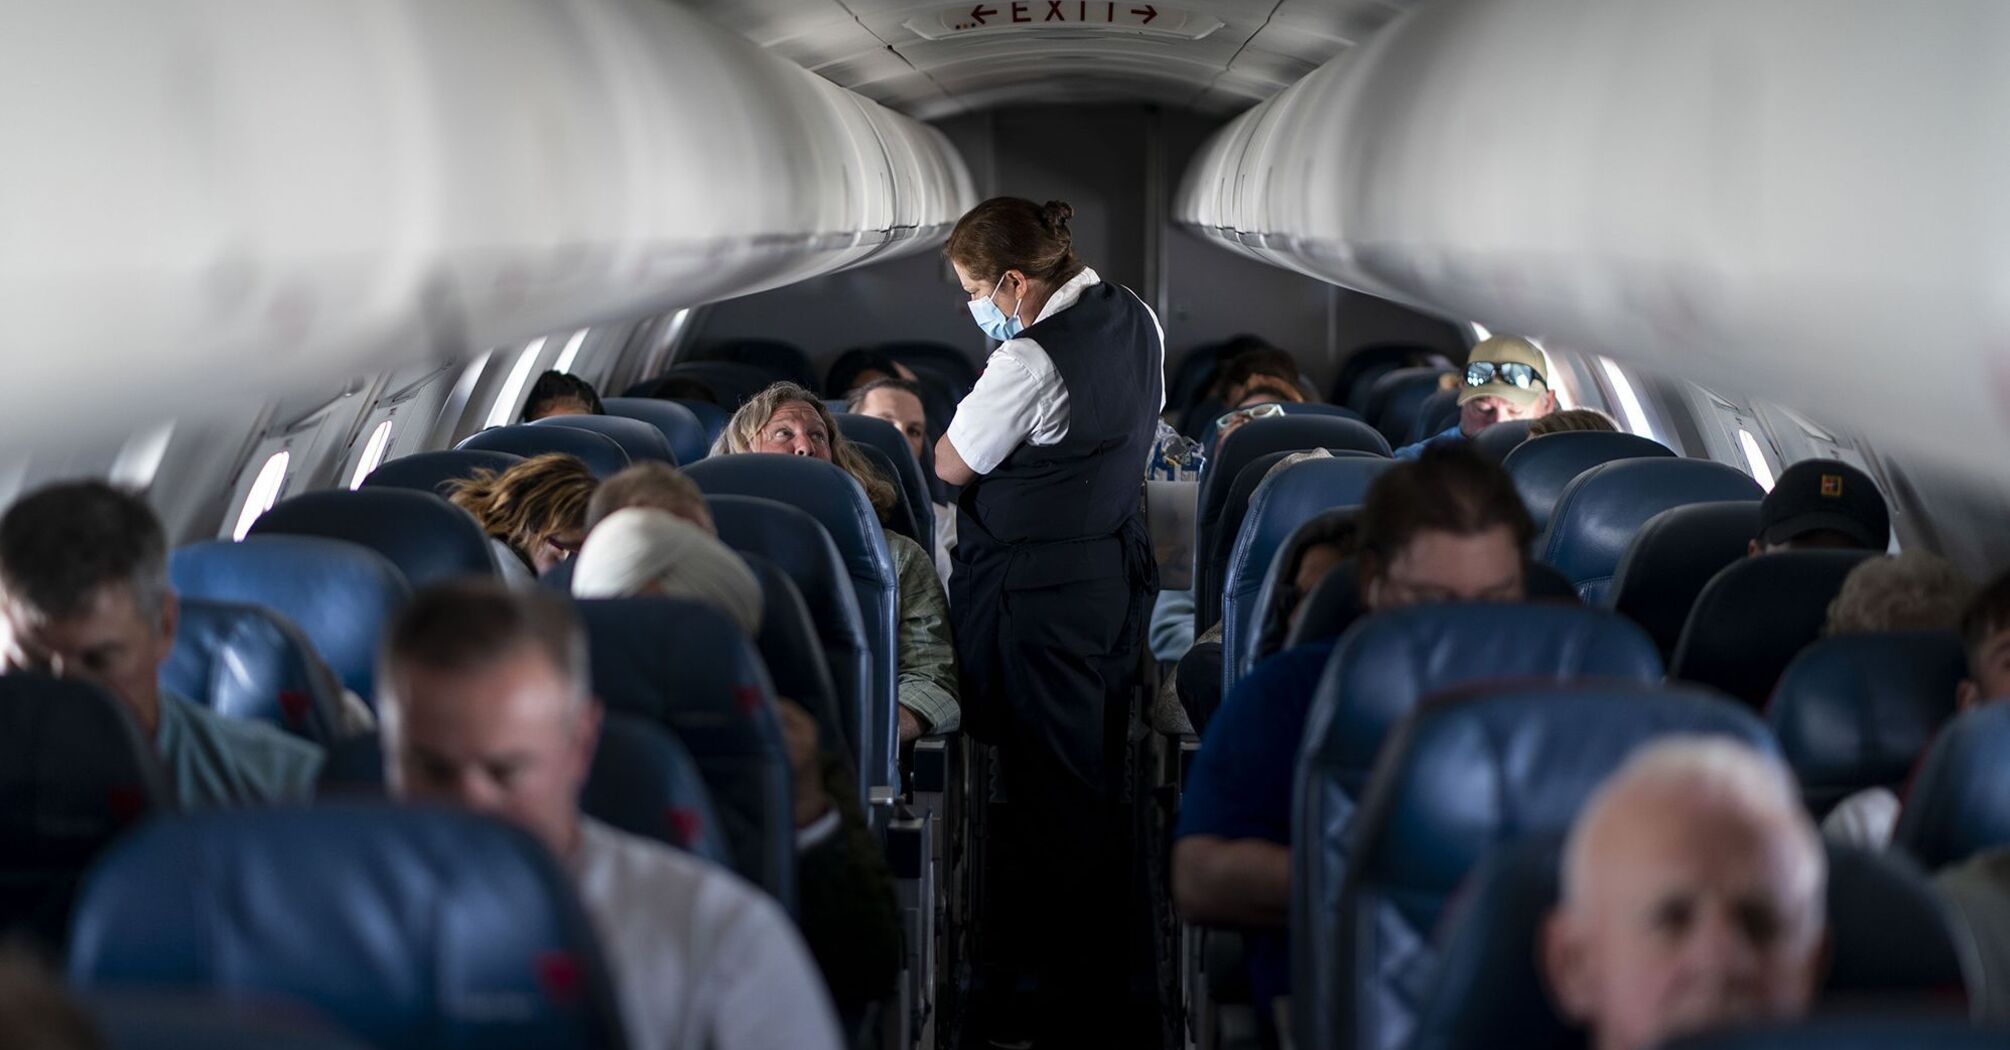 Airplane passenger asked another person on board to shut up